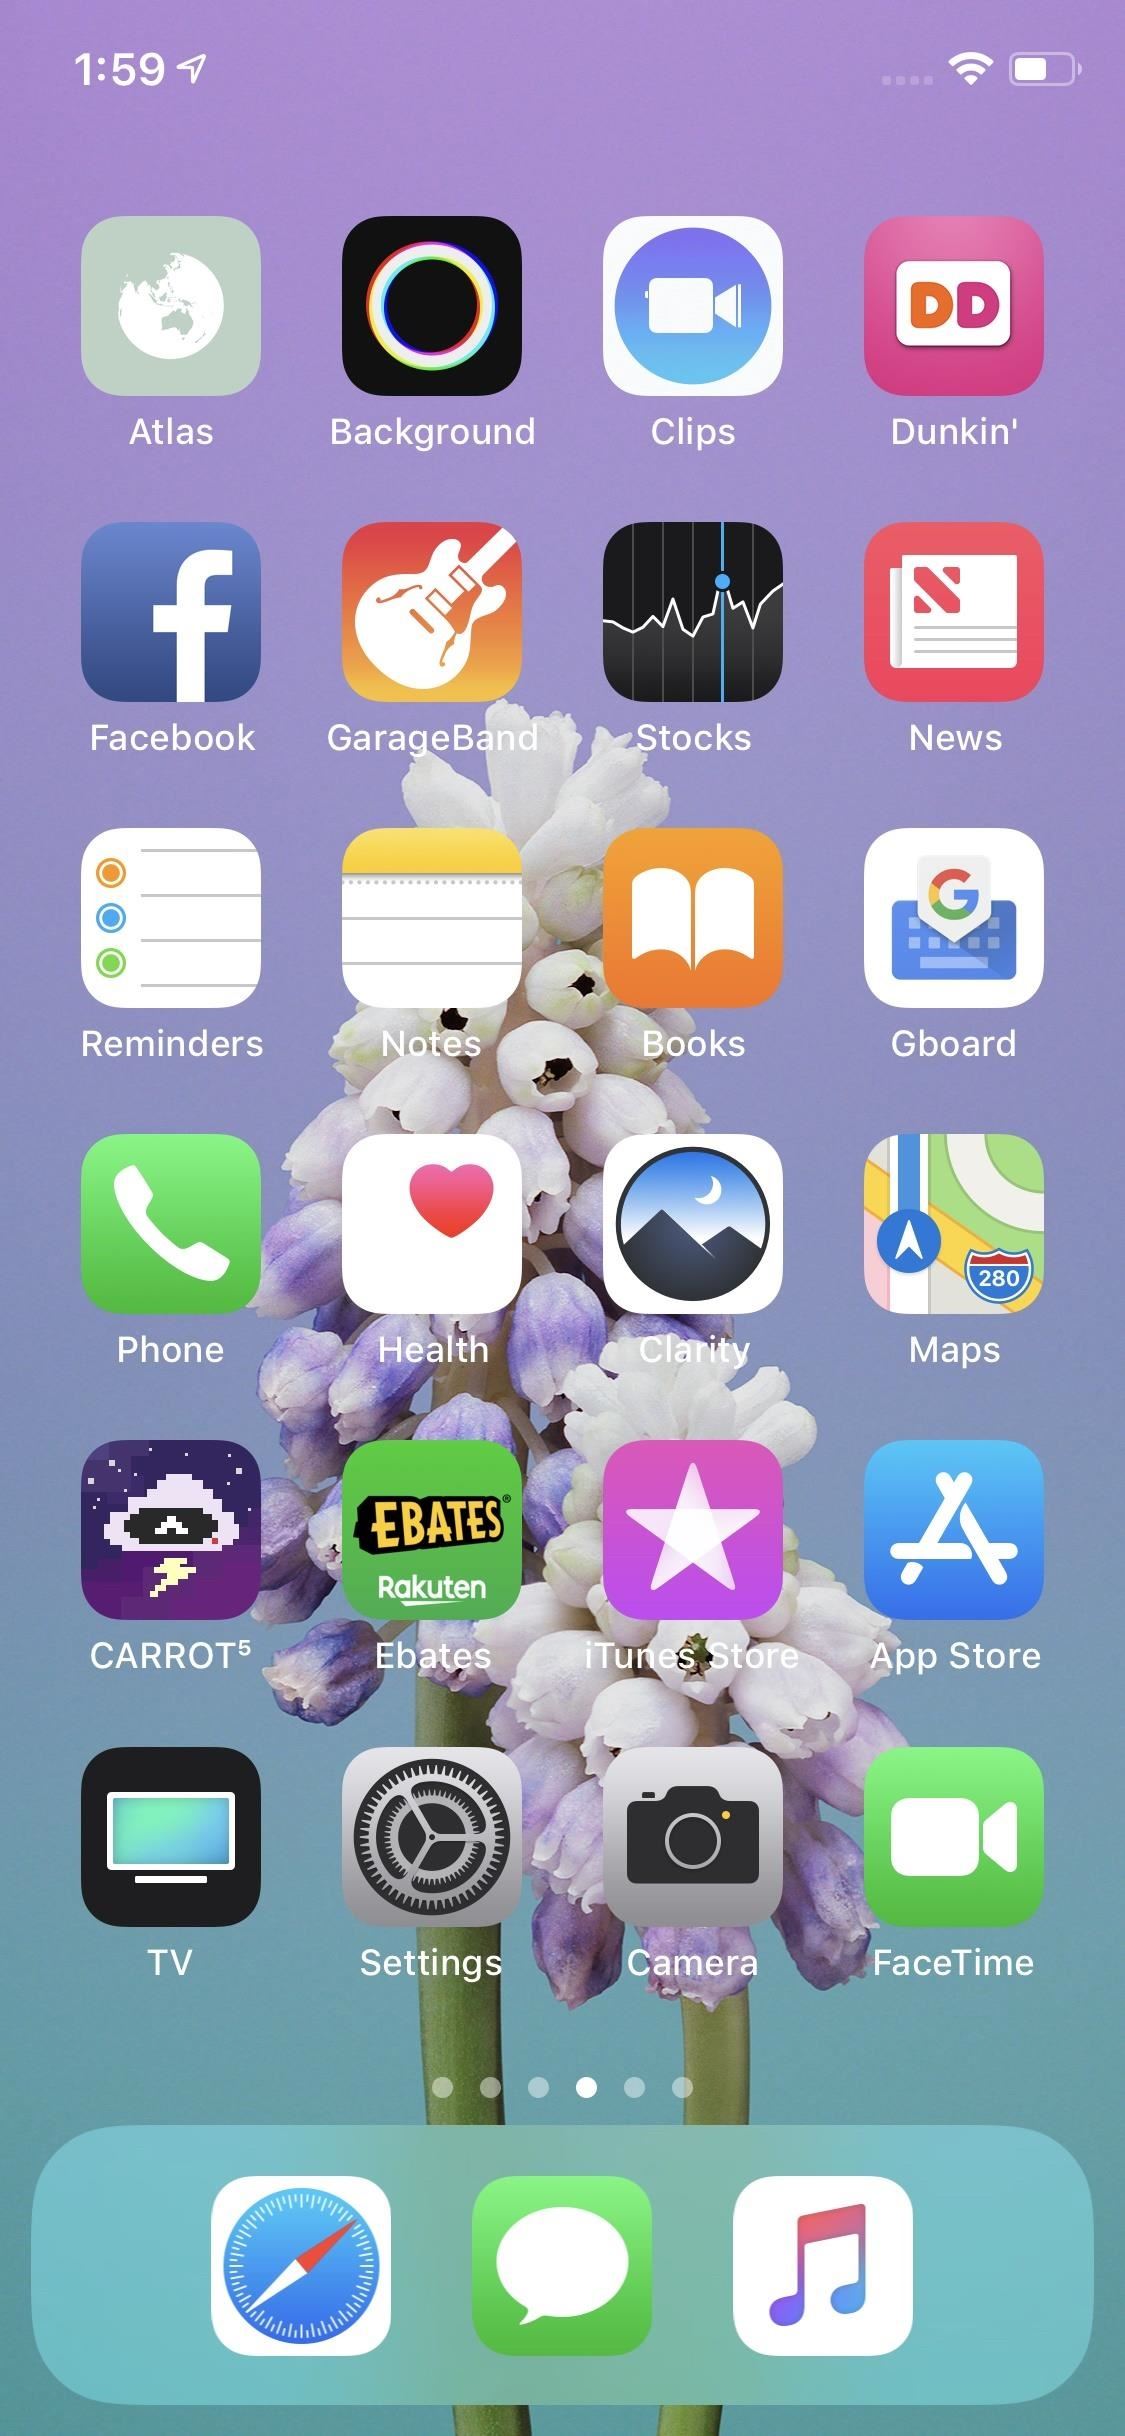 The Ultimate Guide to Customizing Your iPhone's Home Screen Without Jailbreaking